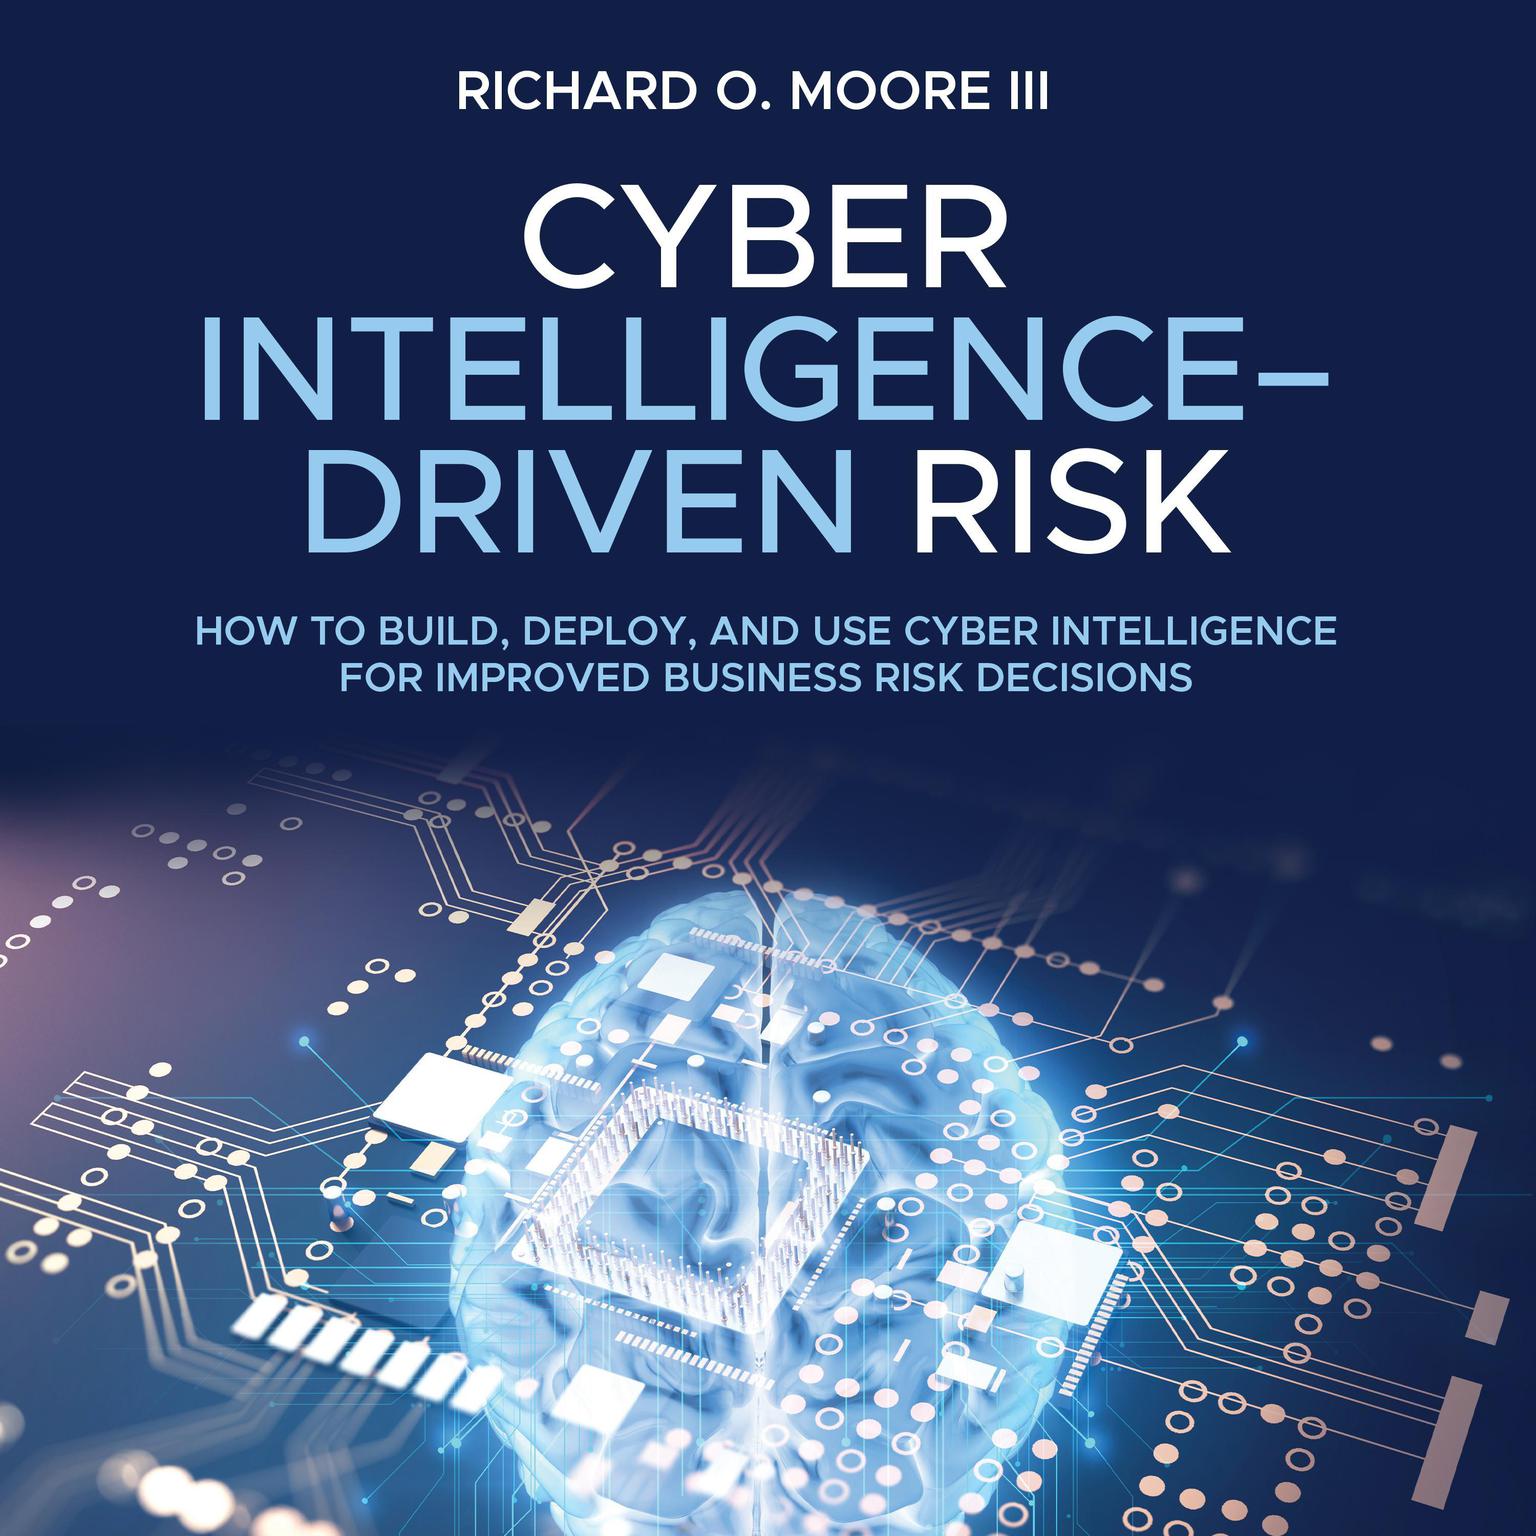 Cyber Intelligence Driven Risk: How to Build, Deploy, and Use Cyber Intelligence for Improved Business Risk Decisions Audiobook, by Richard O. Moore